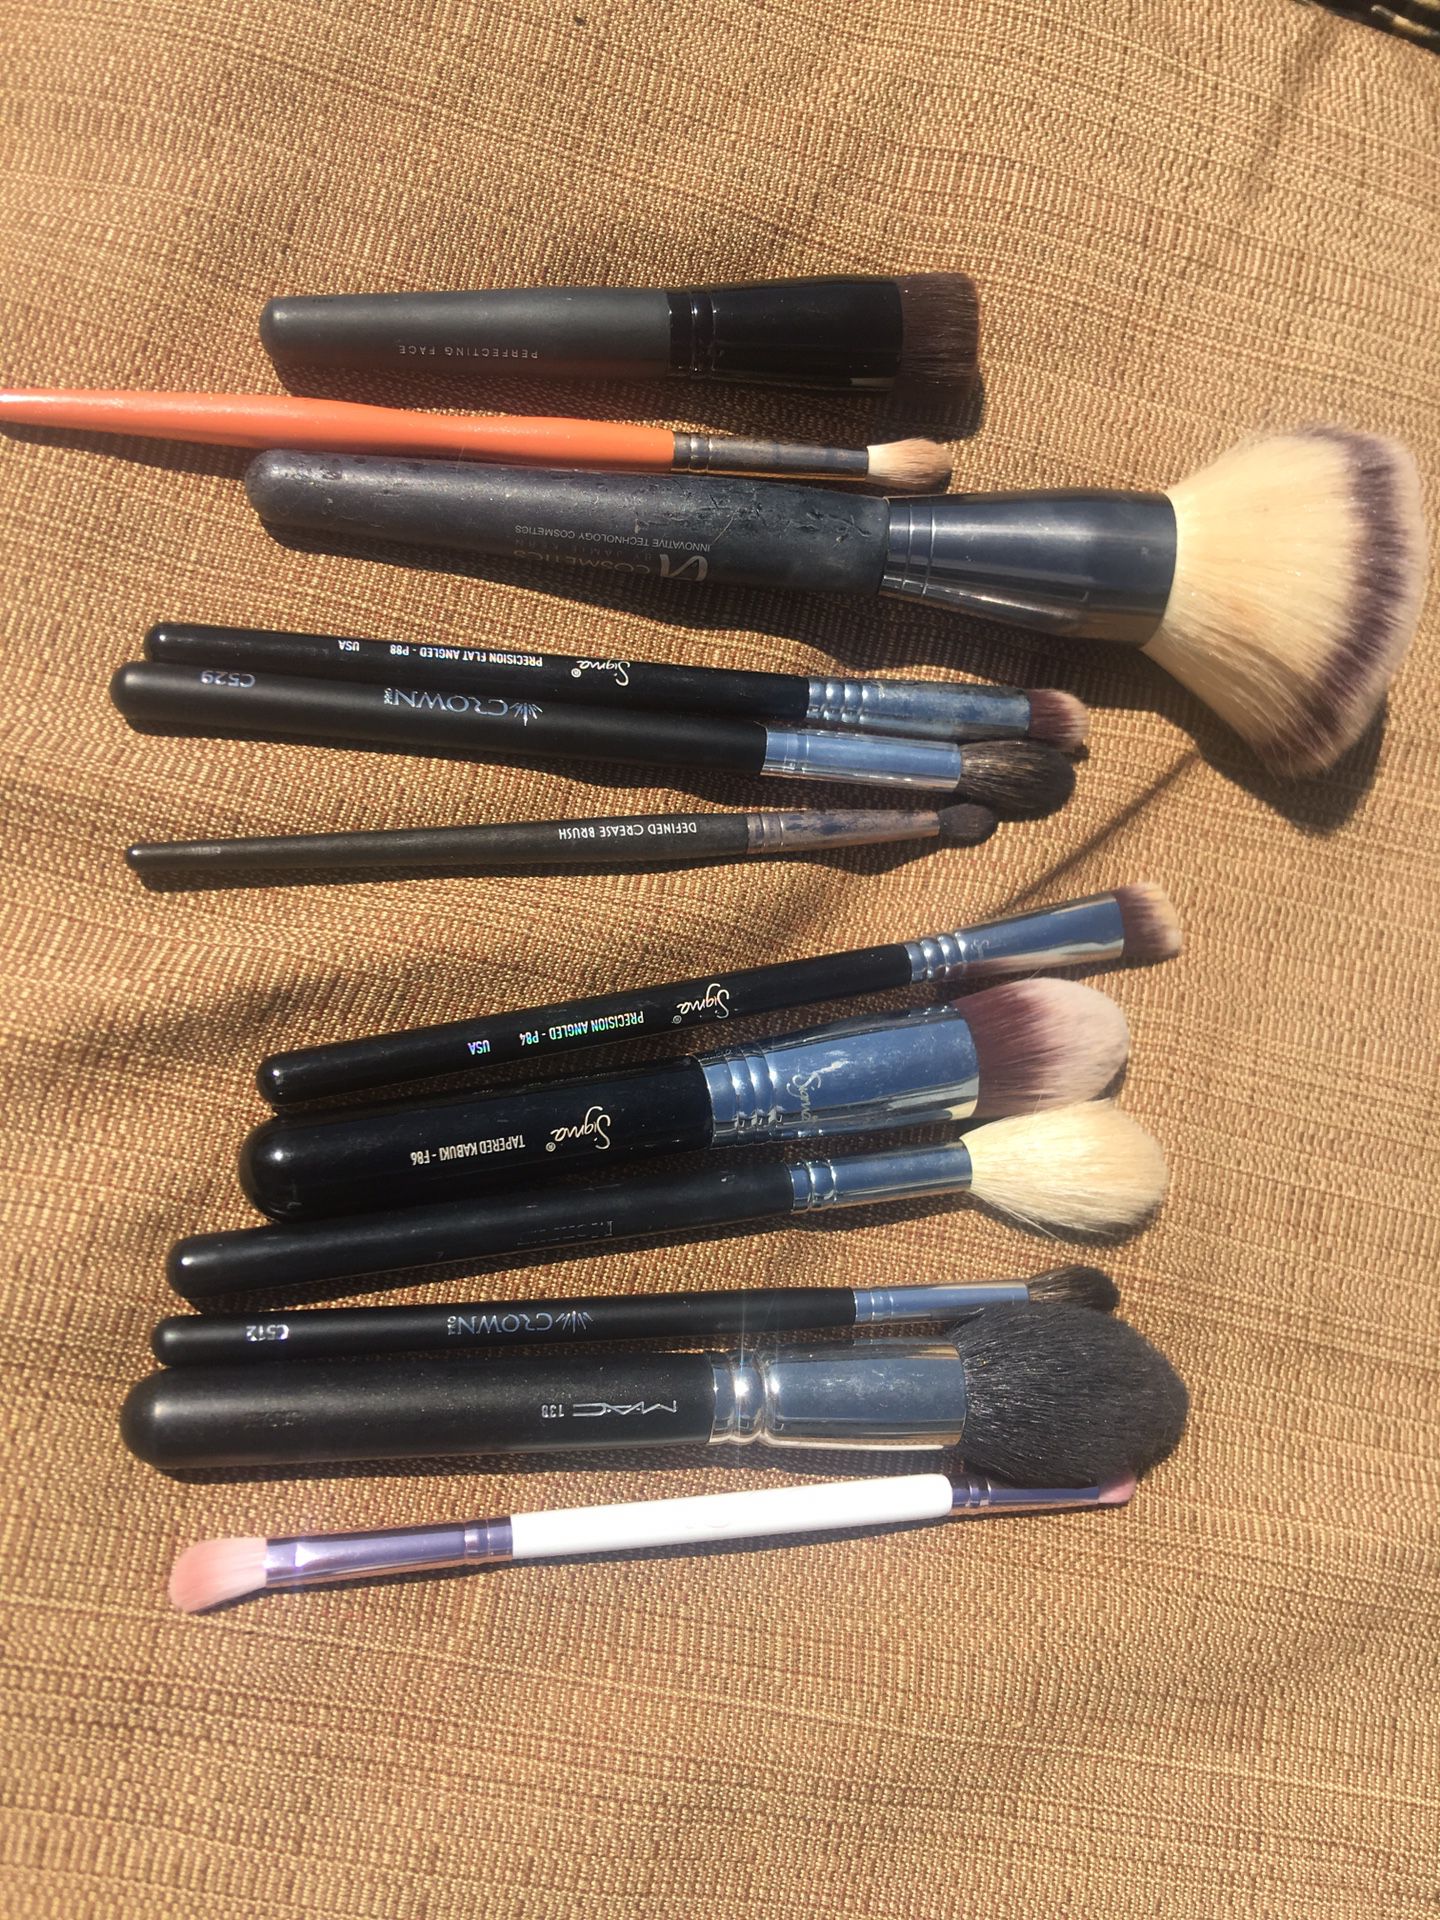 Used makeup brushes